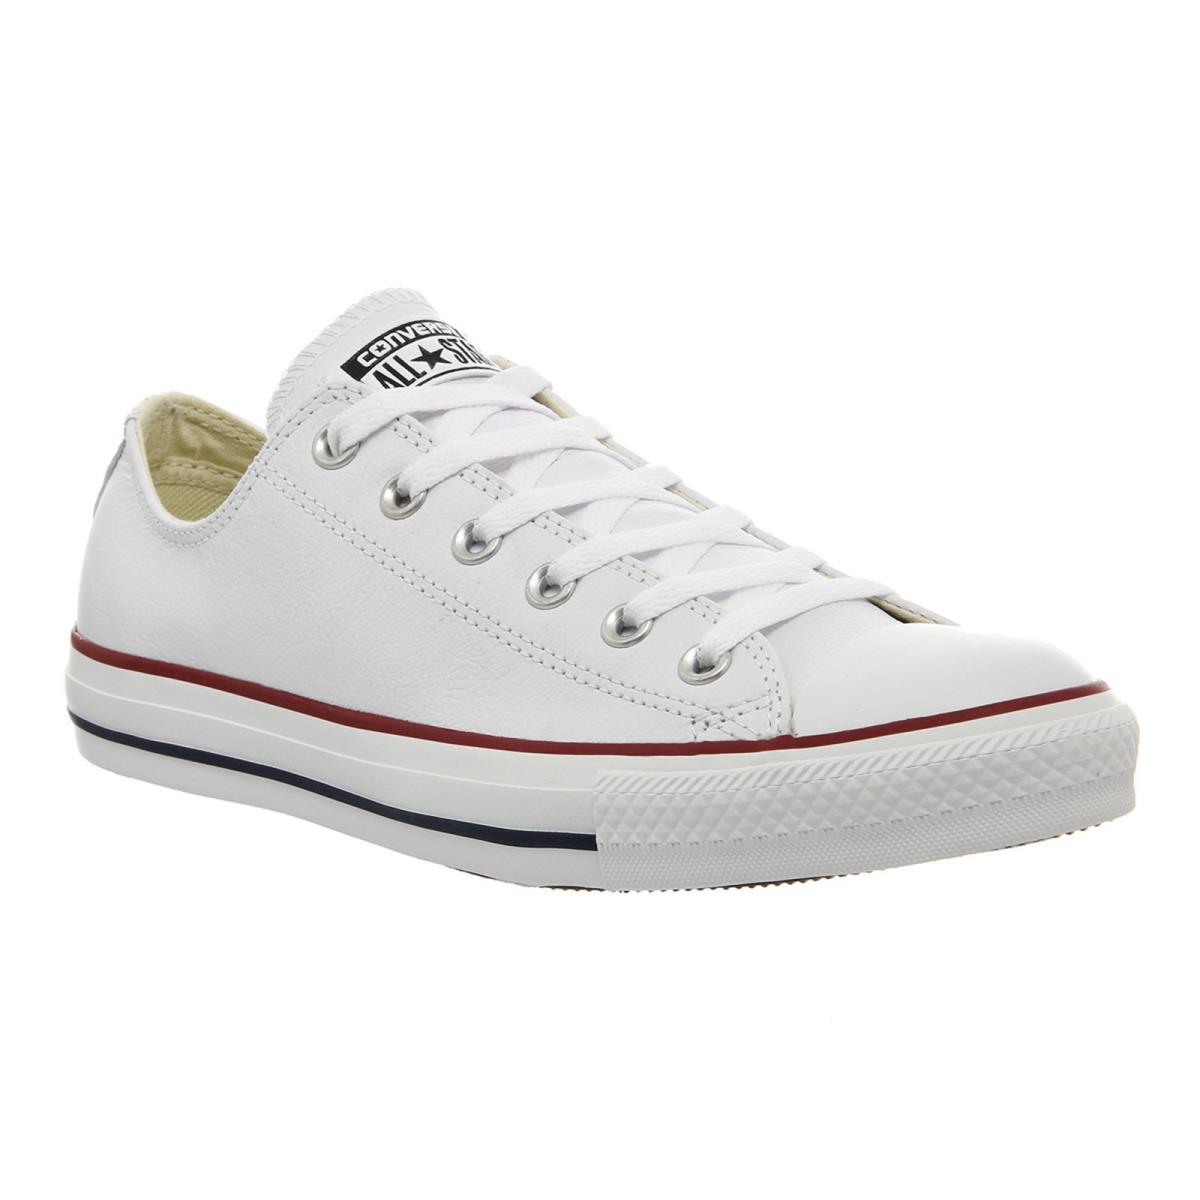 Converse Chuck Taylor Low Top Leather Mens Casual Shoes Optic White